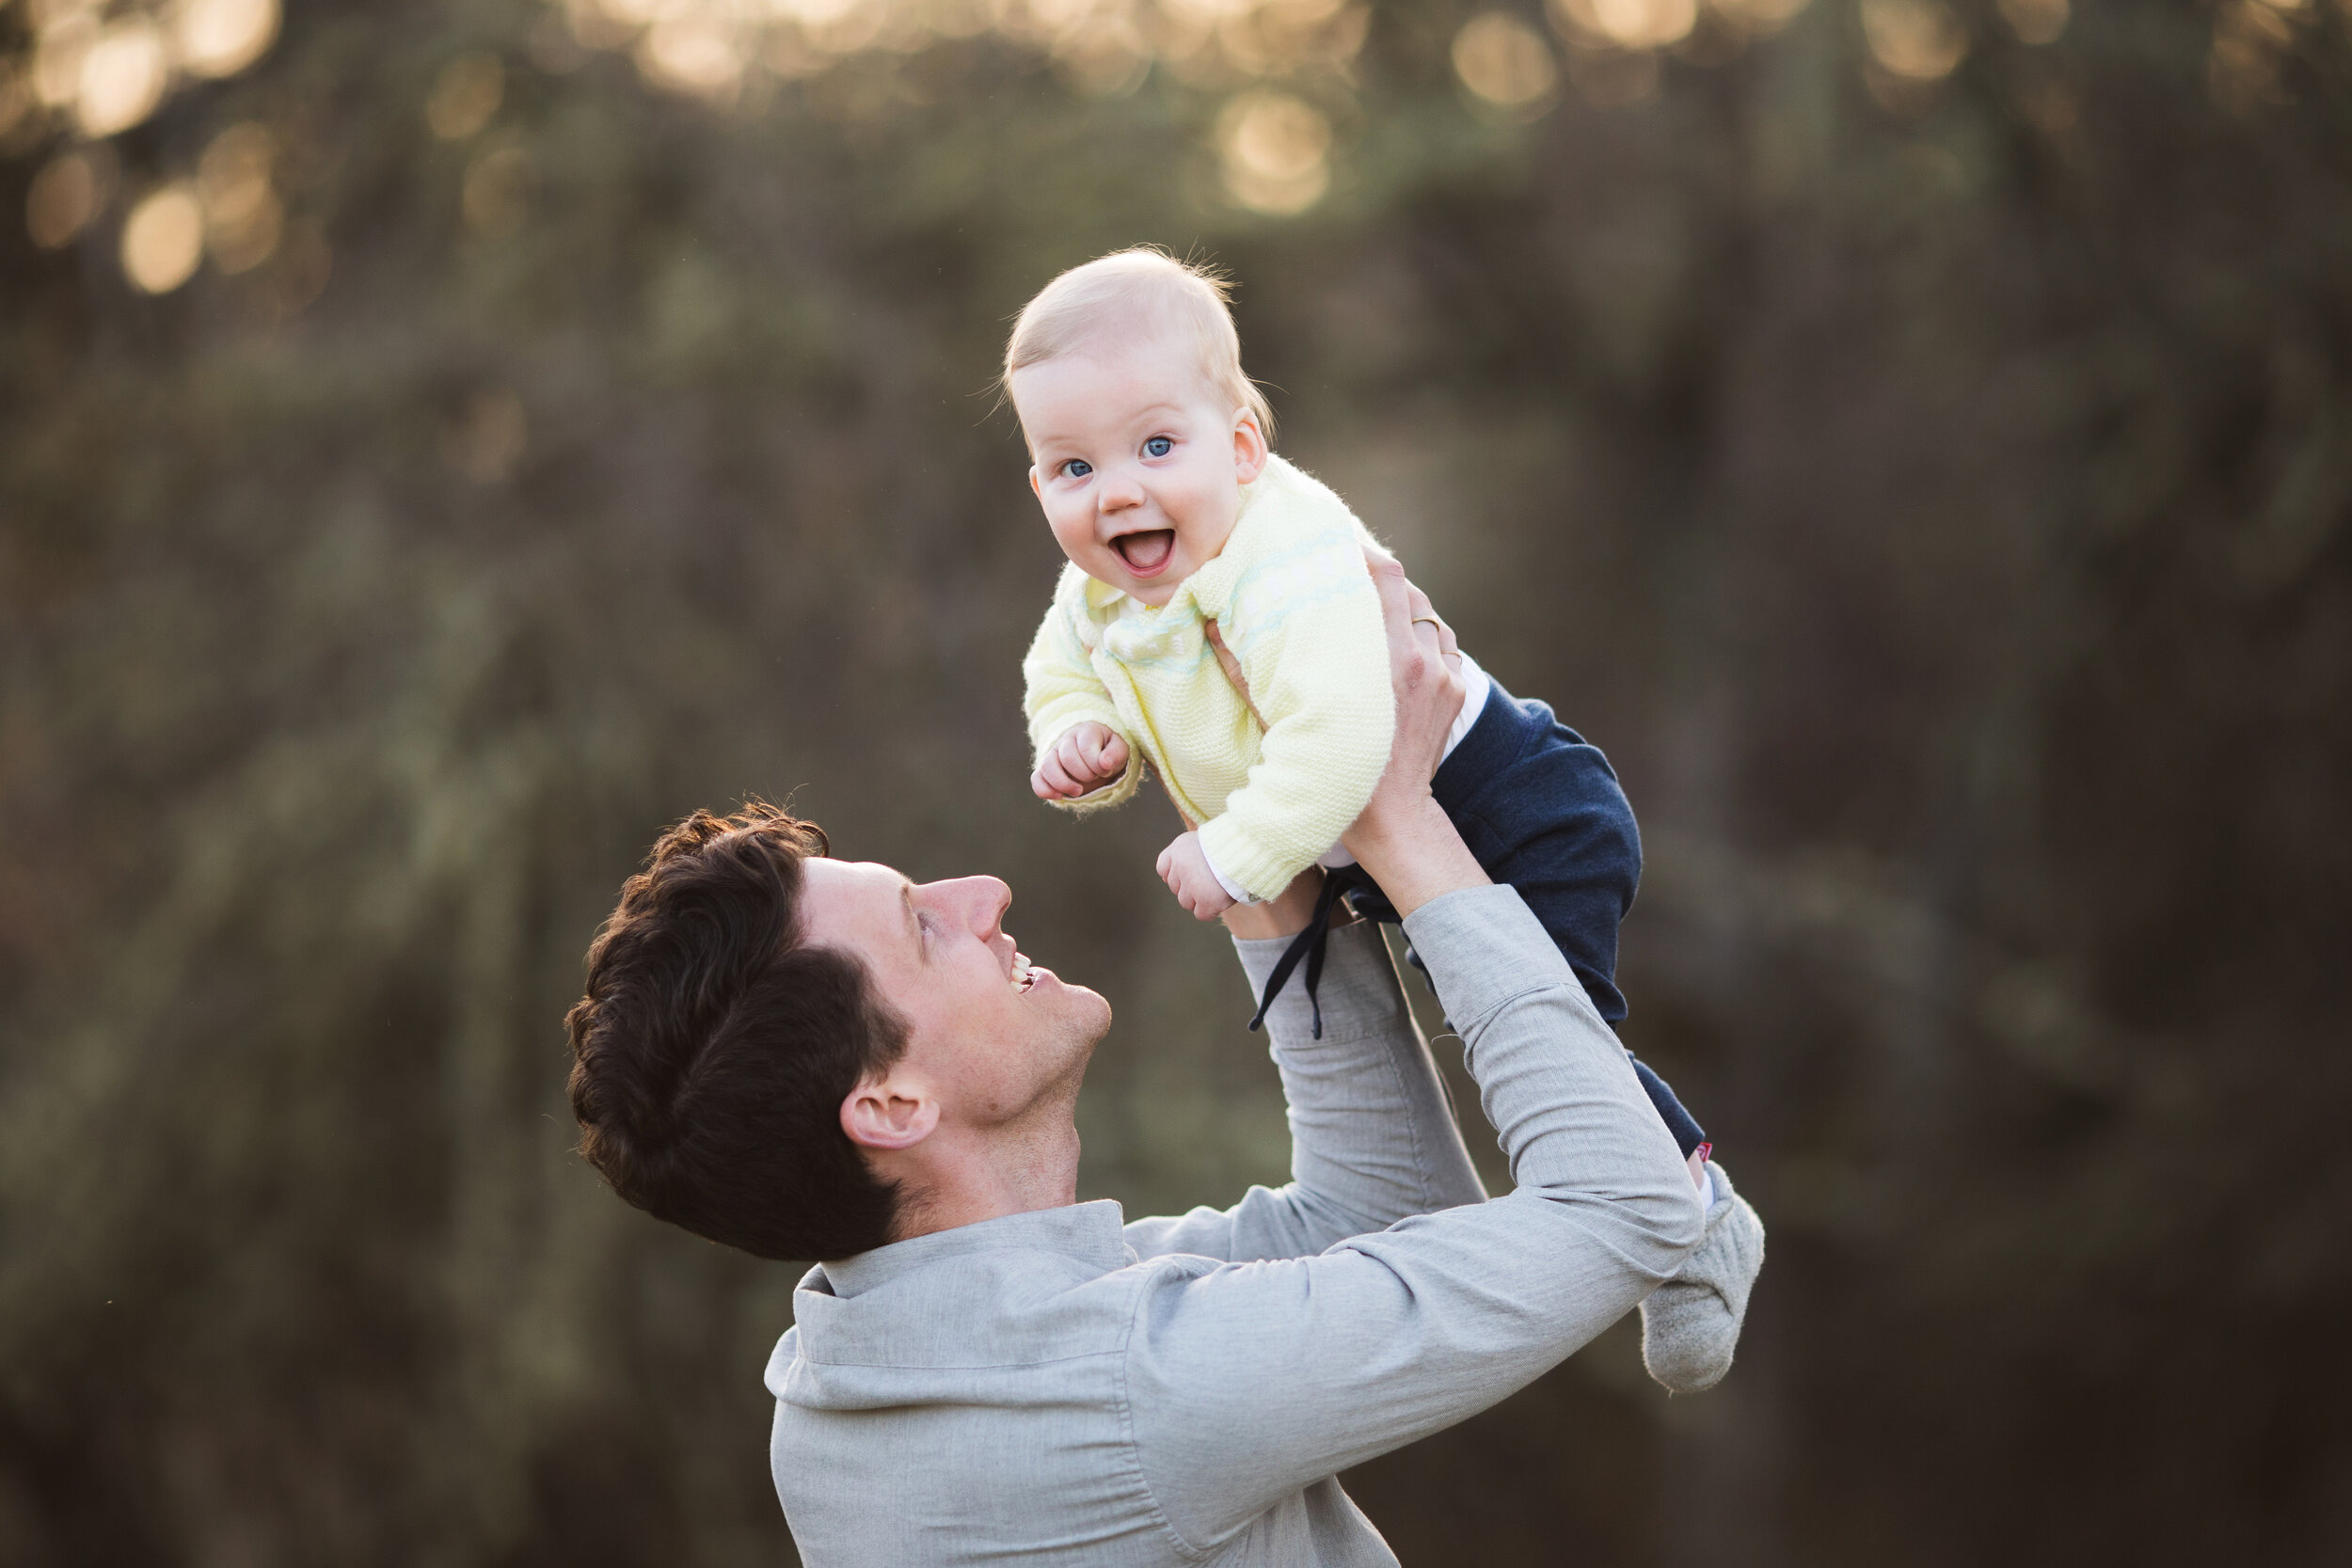 Seattle Father playing with 9 month old son during outdoor photography sessions.